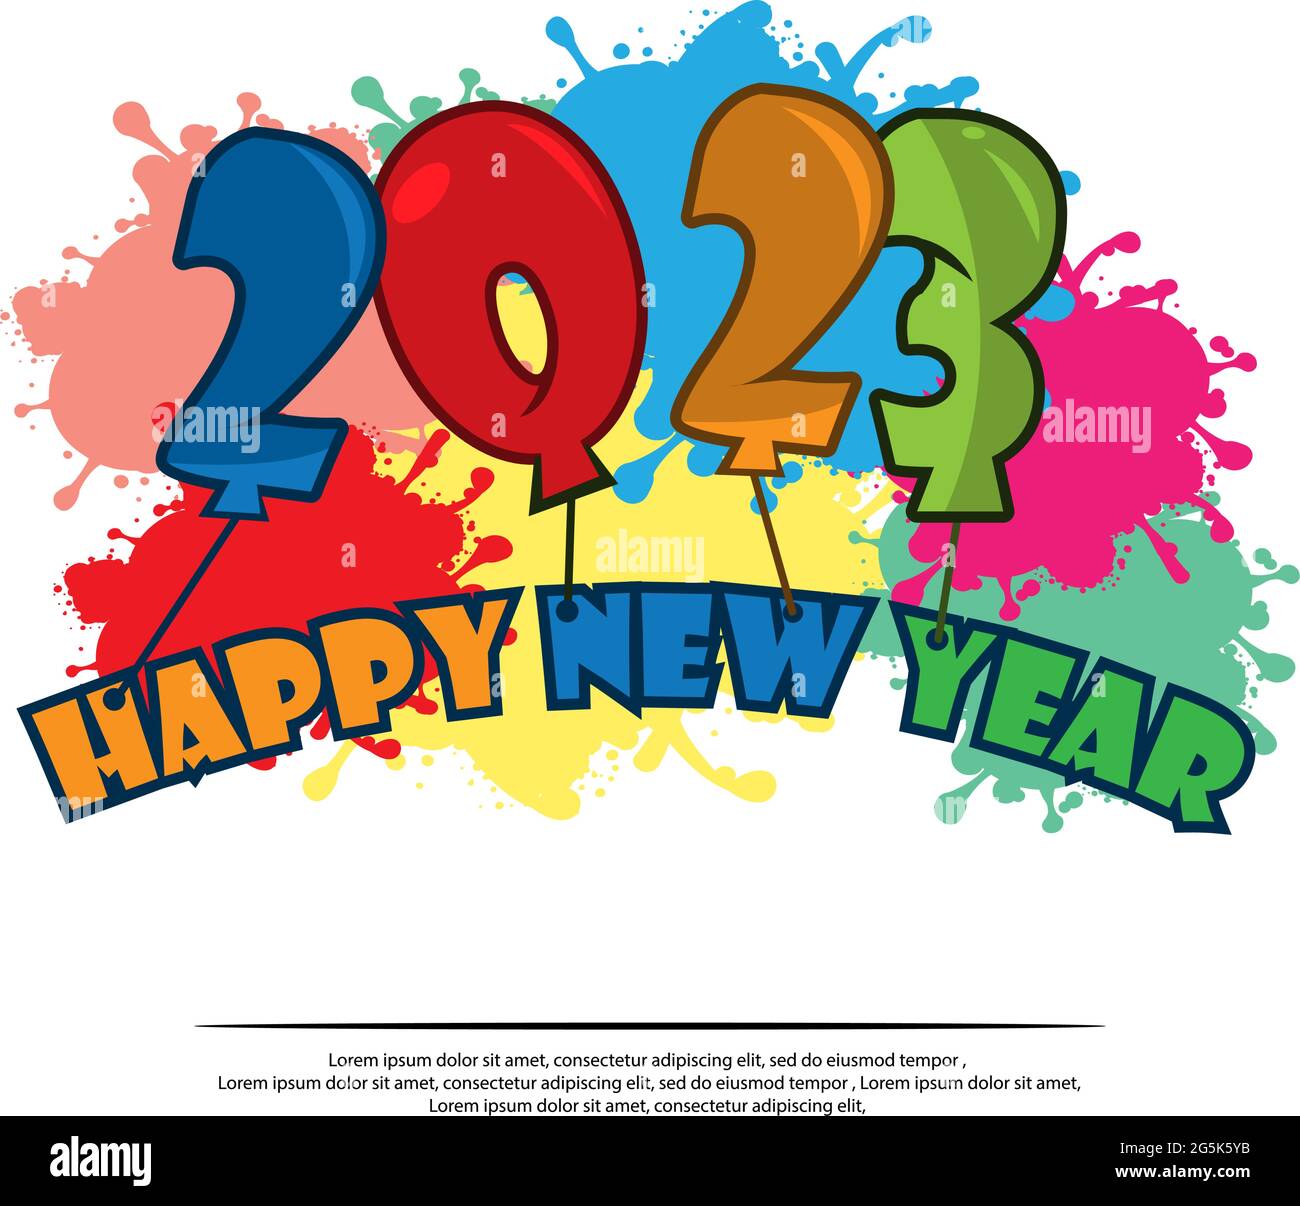 Happy new year 2023 vector Stock Vector Images - Alamy